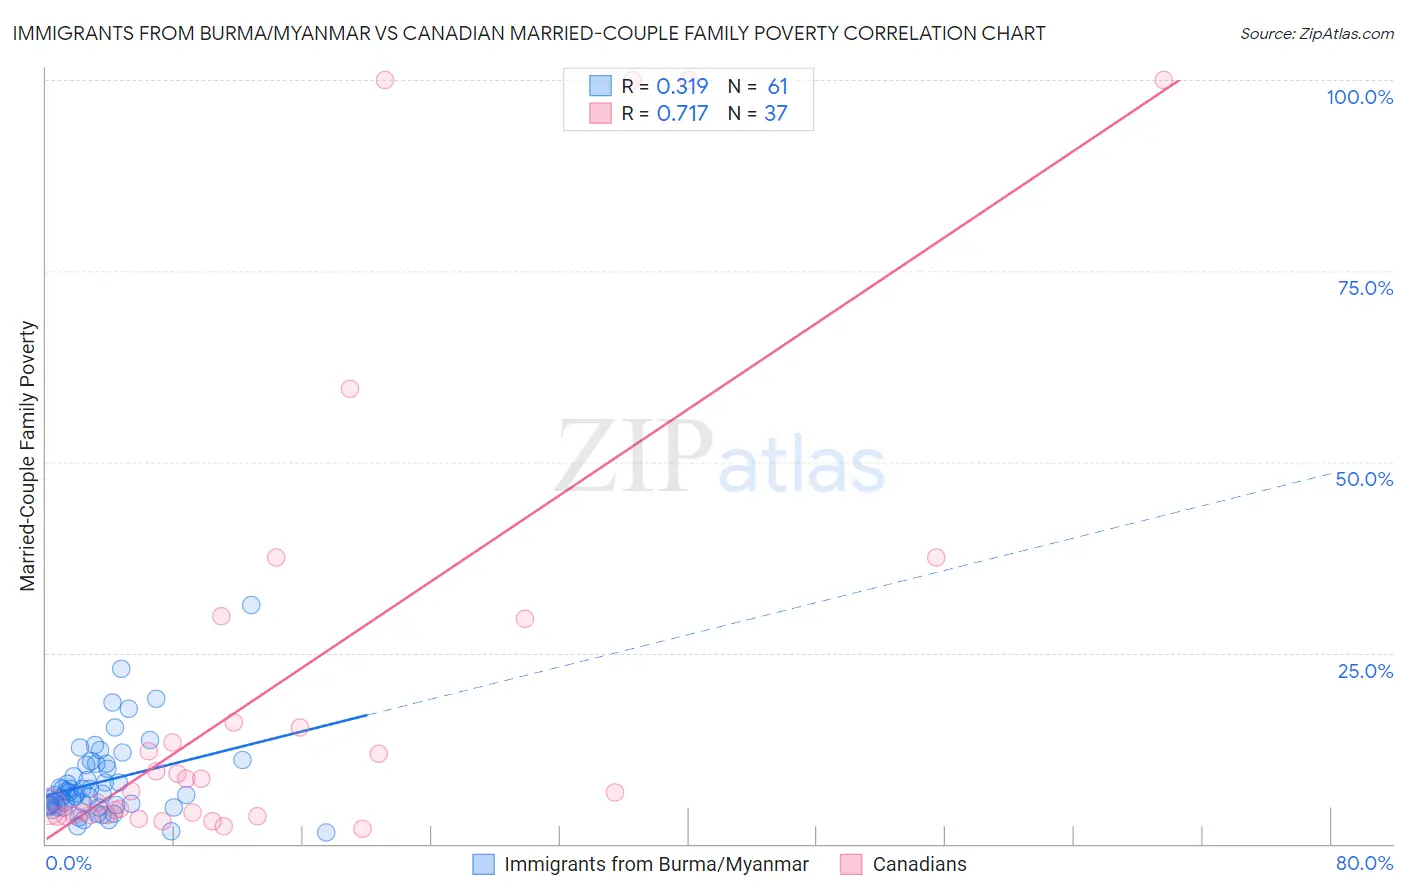 Immigrants from Burma/Myanmar vs Canadian Married-Couple Family Poverty